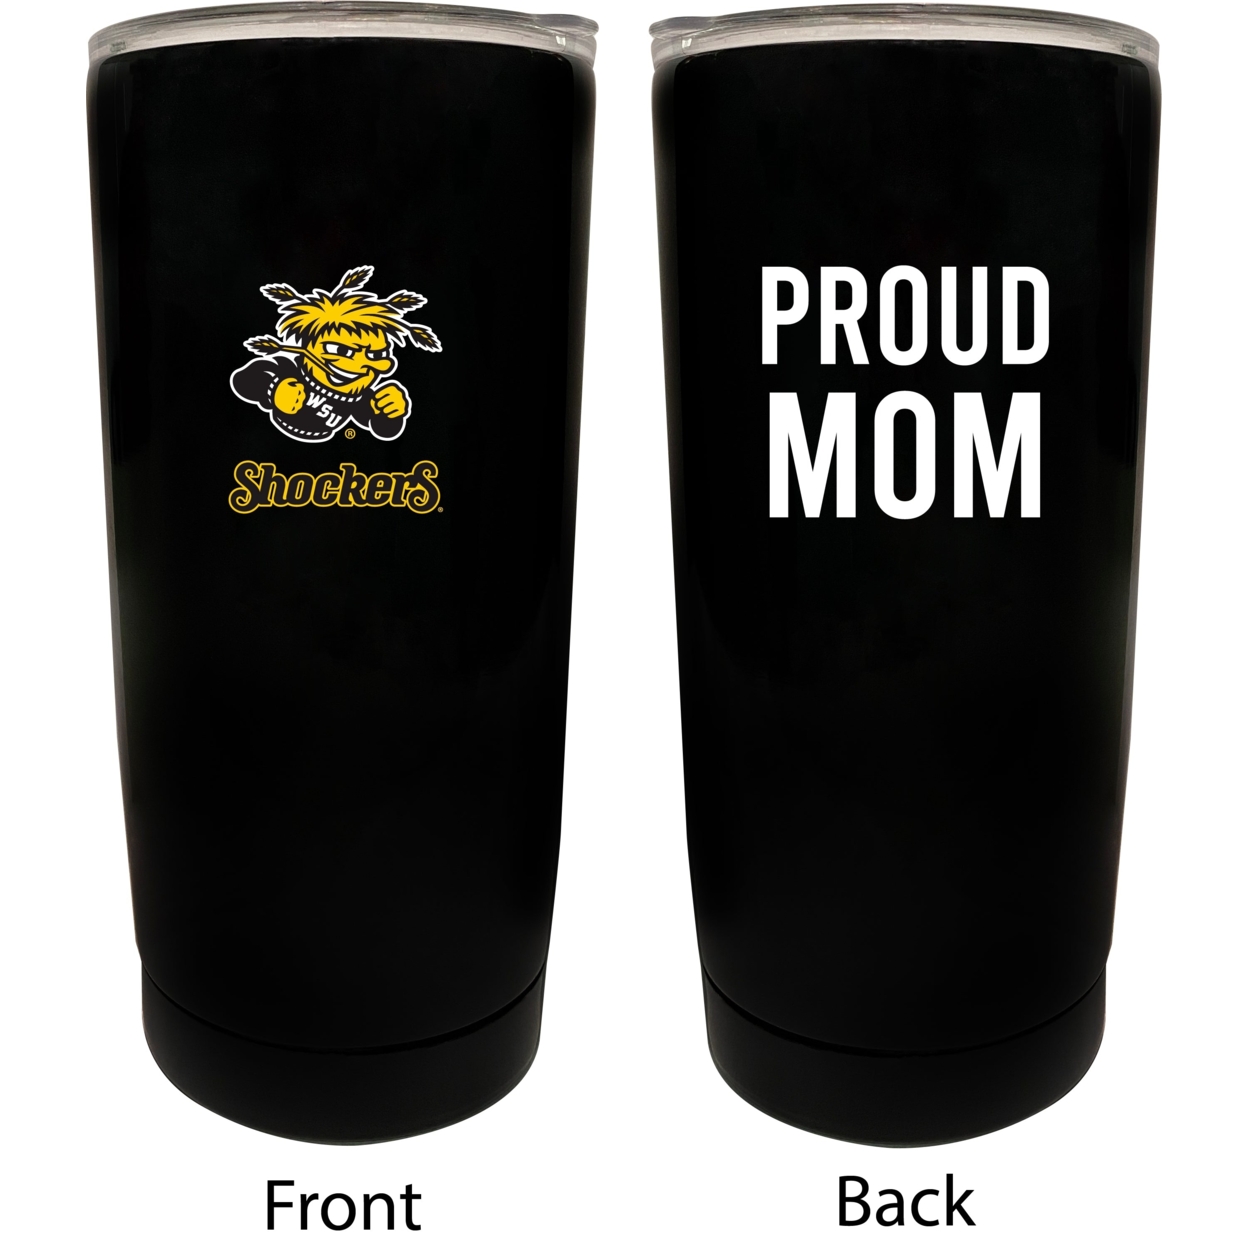 Wichita State Shockers Proud Mom 16 Oz Insulated Stainless Steel Tumblers